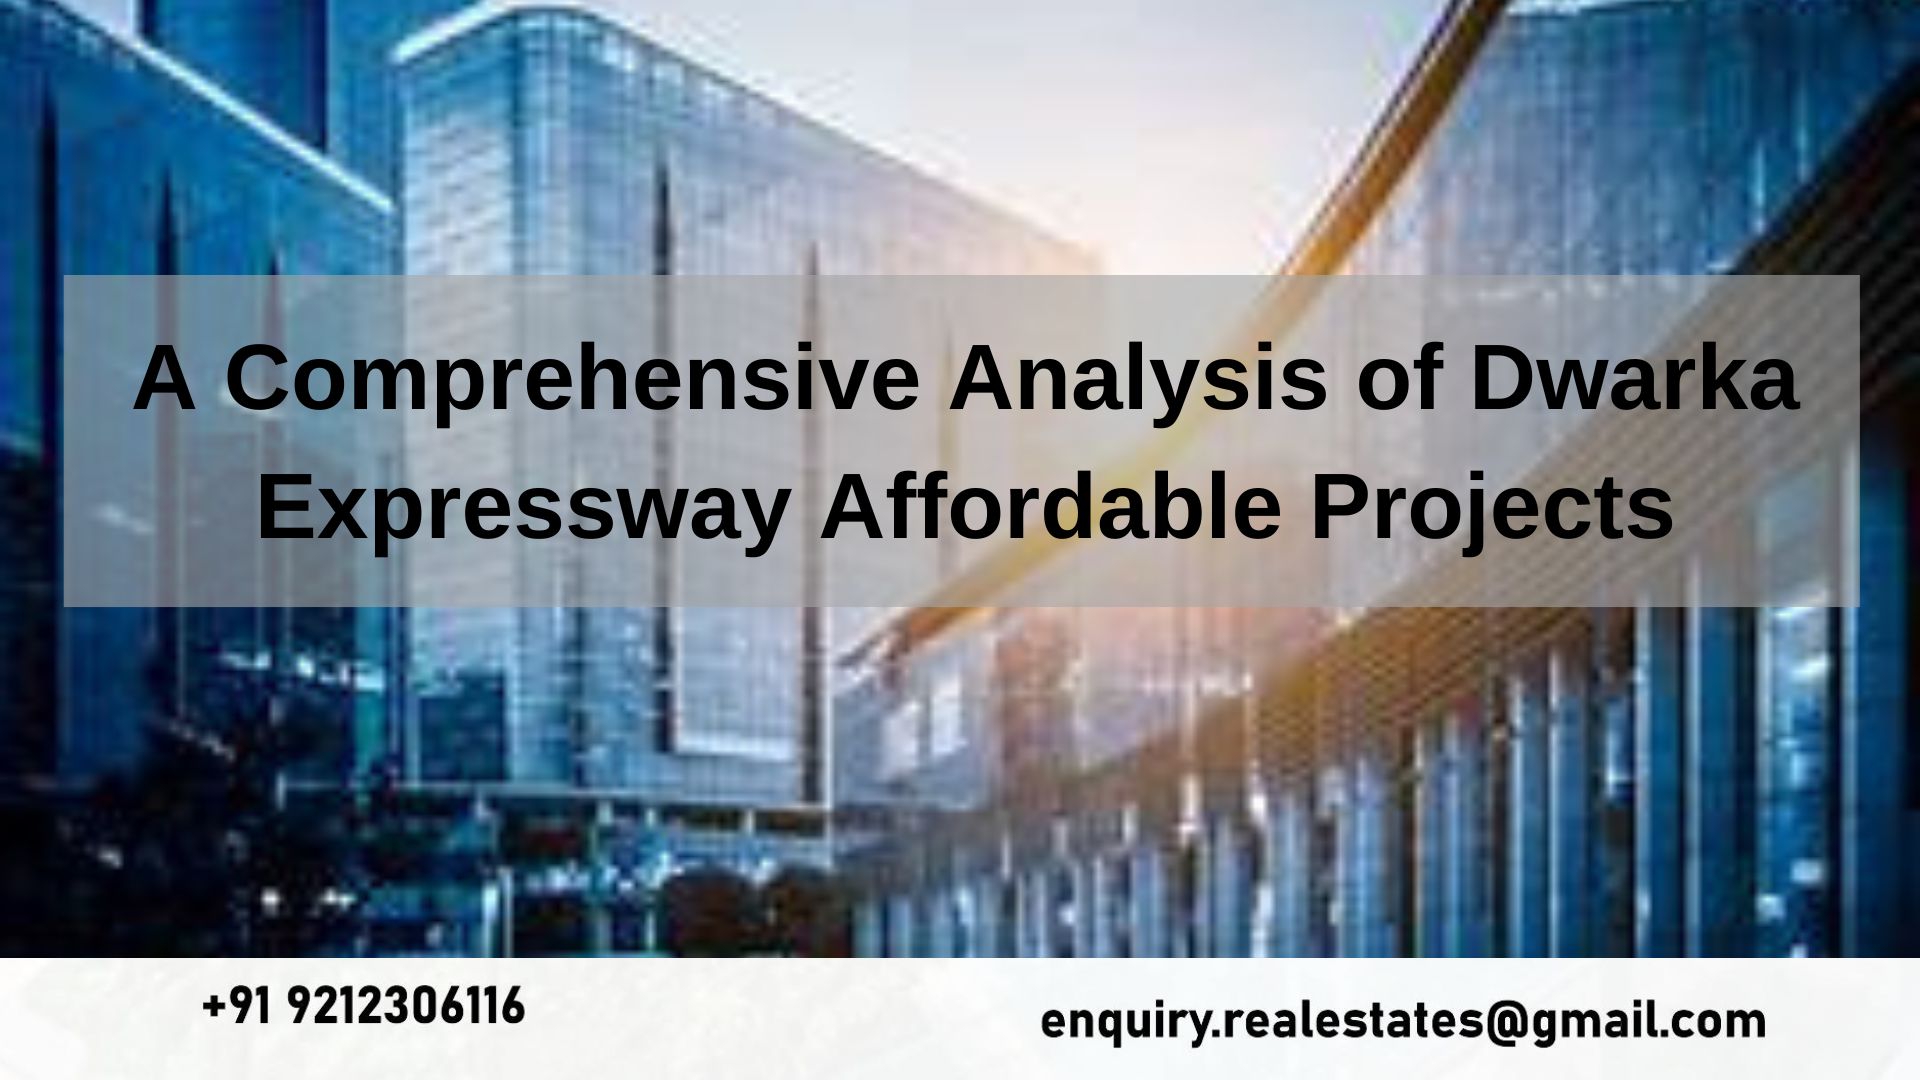 A Comprehensive Analysis of Dwarka Expressway Affordable Projects